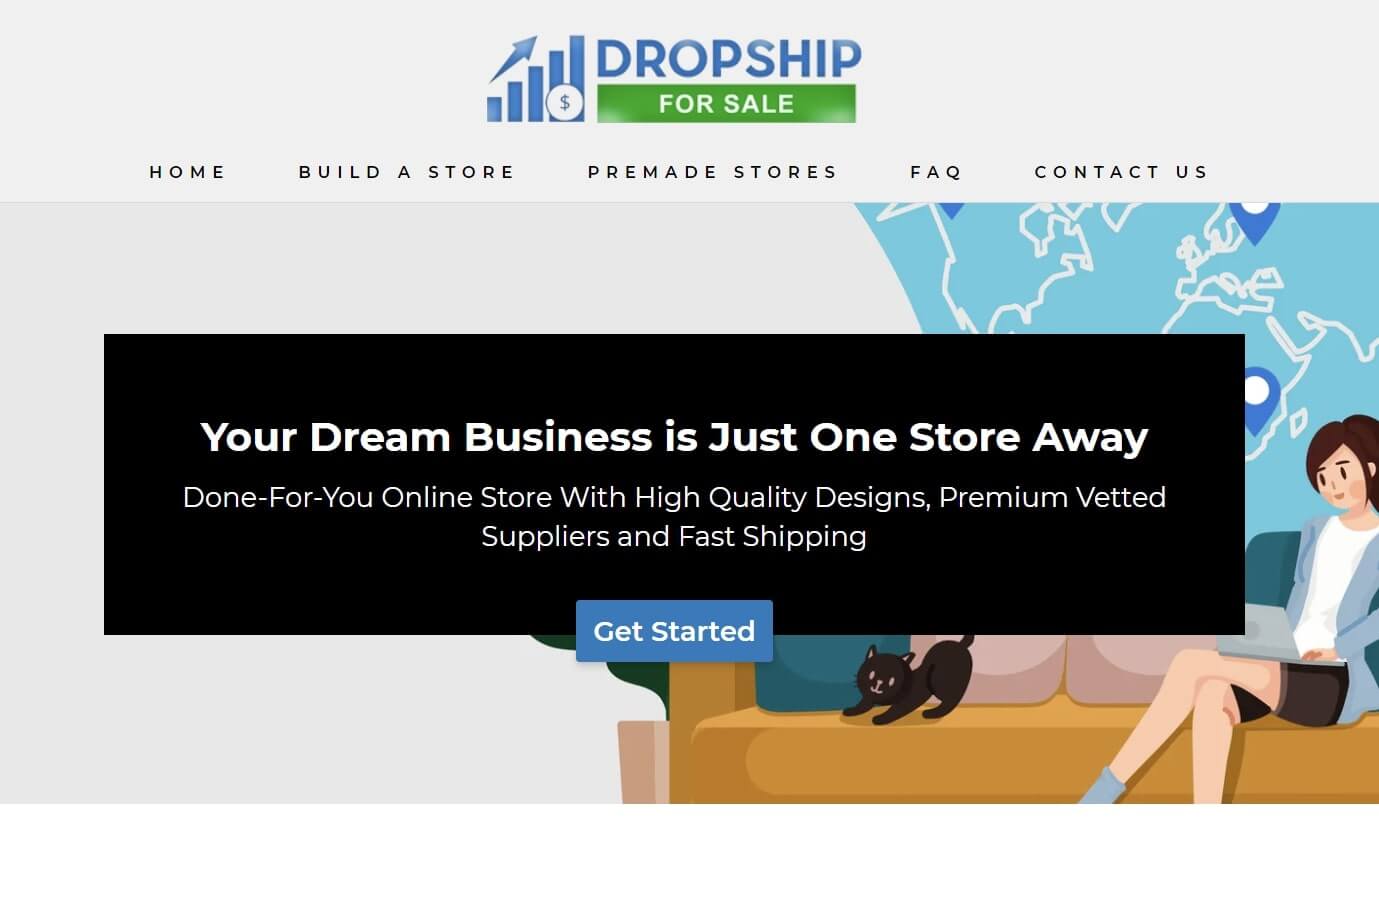 Dropship for Sale